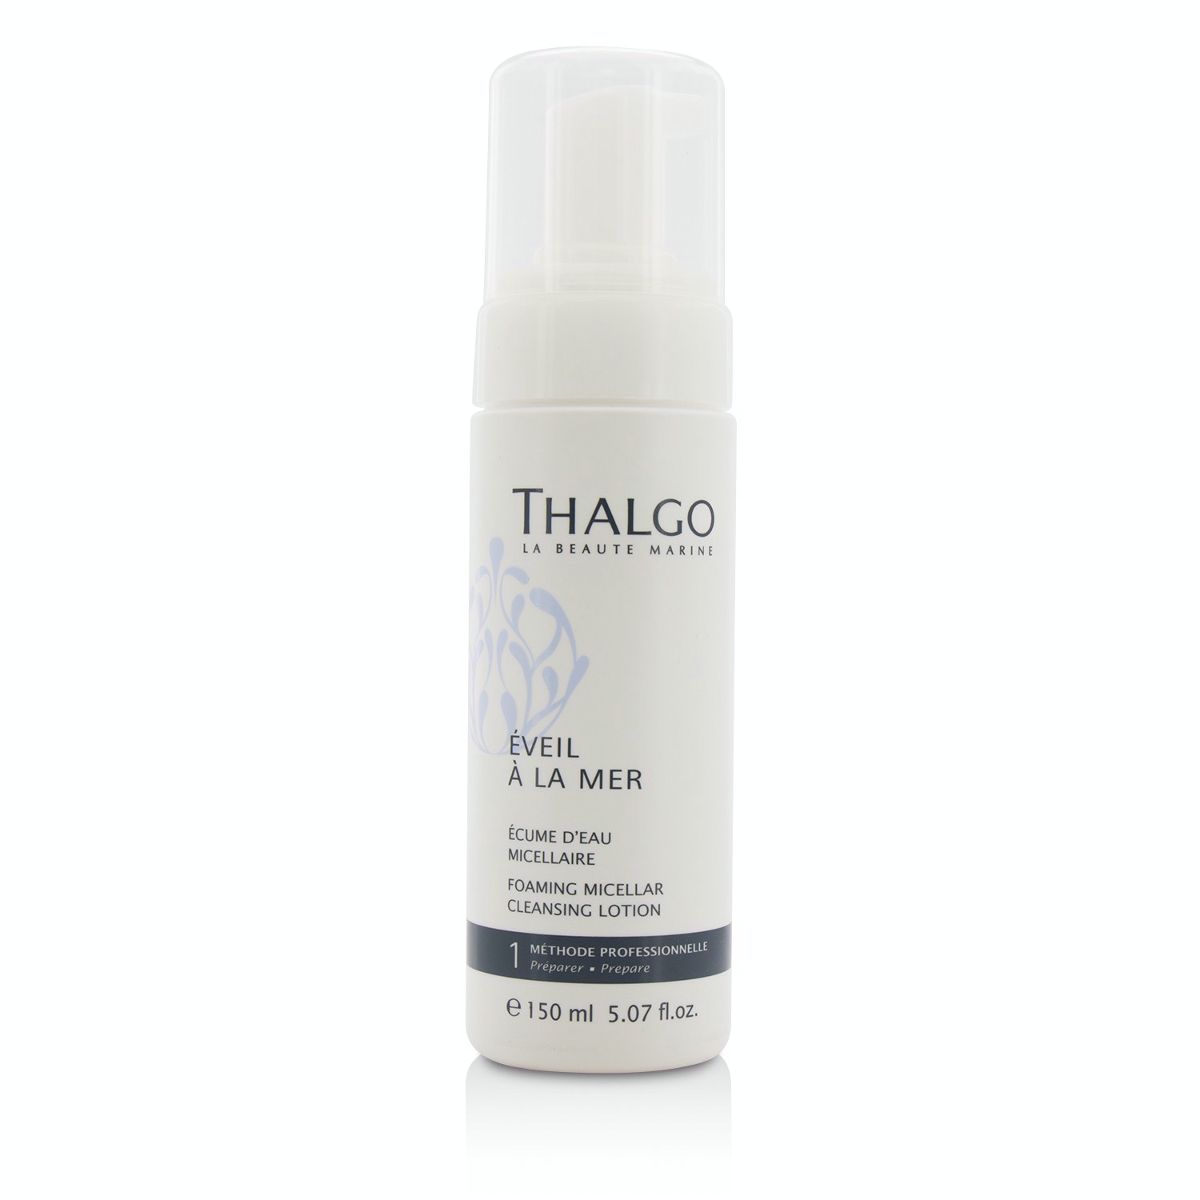 Eveil A La Mer Foaming Micellar Cleansing Lotion - For All Skin Types (Salon Size) Thalgo Image